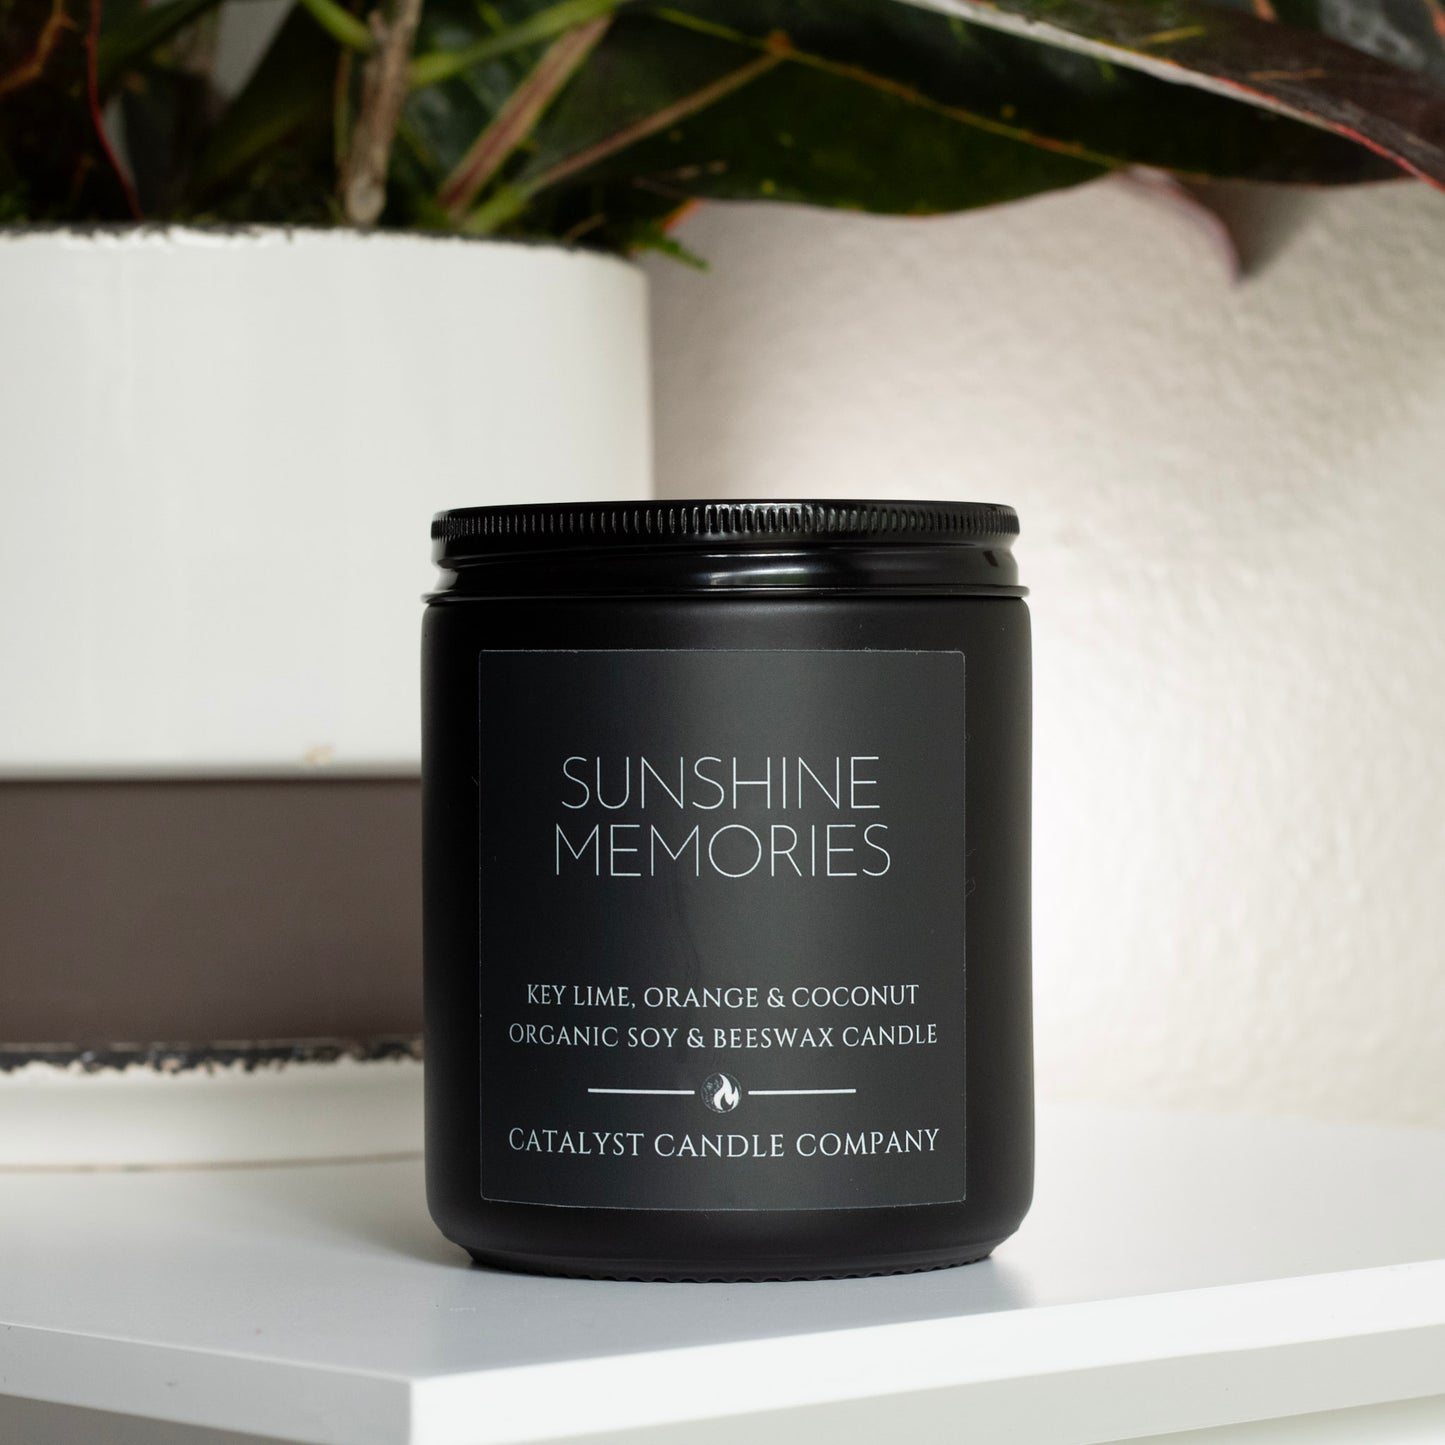 SUNSHINE MEMORIES | Key Lime, Orange & Coconut Scented | 7oz Single-Wick | Organic Soy & Beeswax Candle